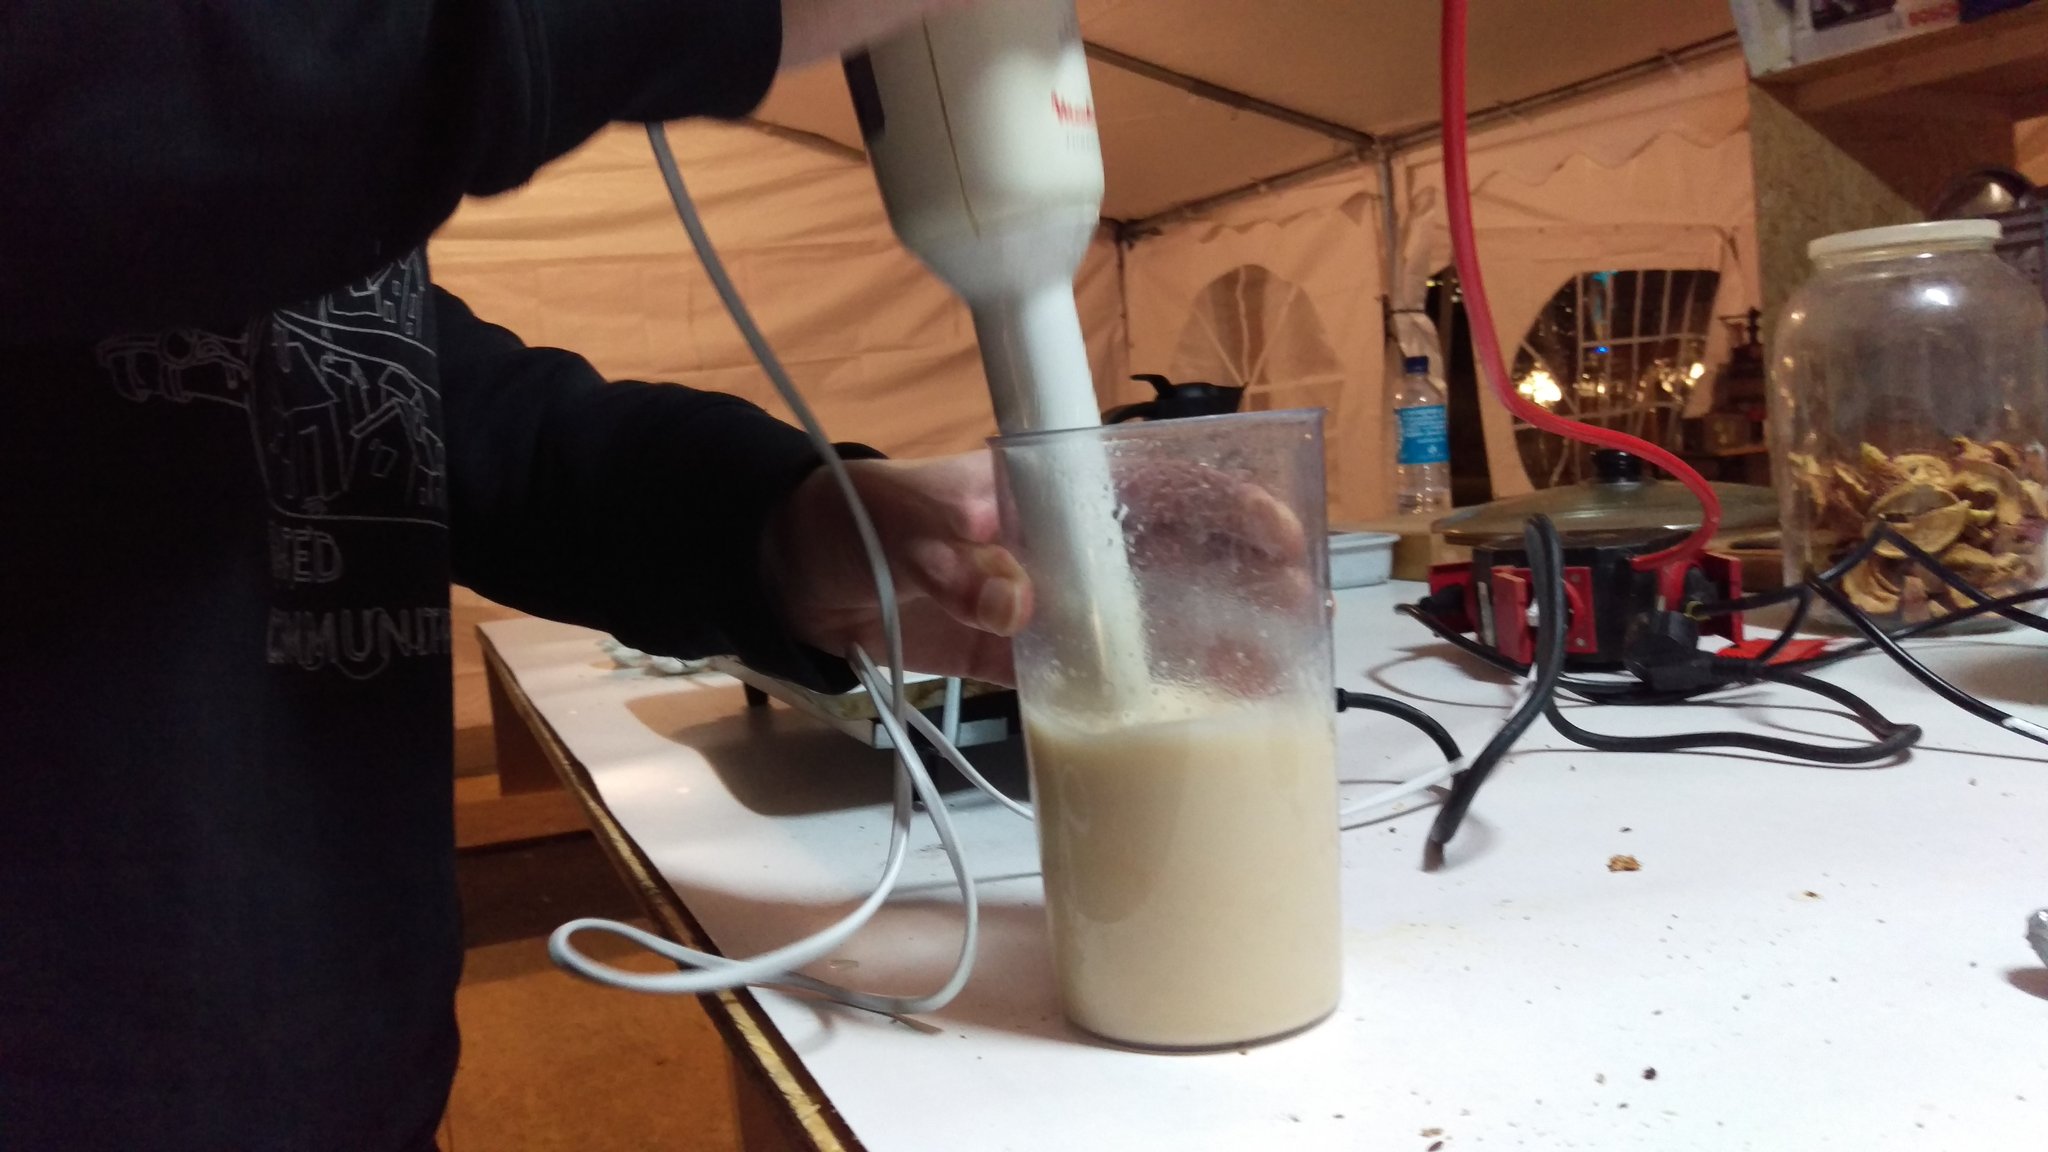 An image of an immersion blender mixing Tschunk!